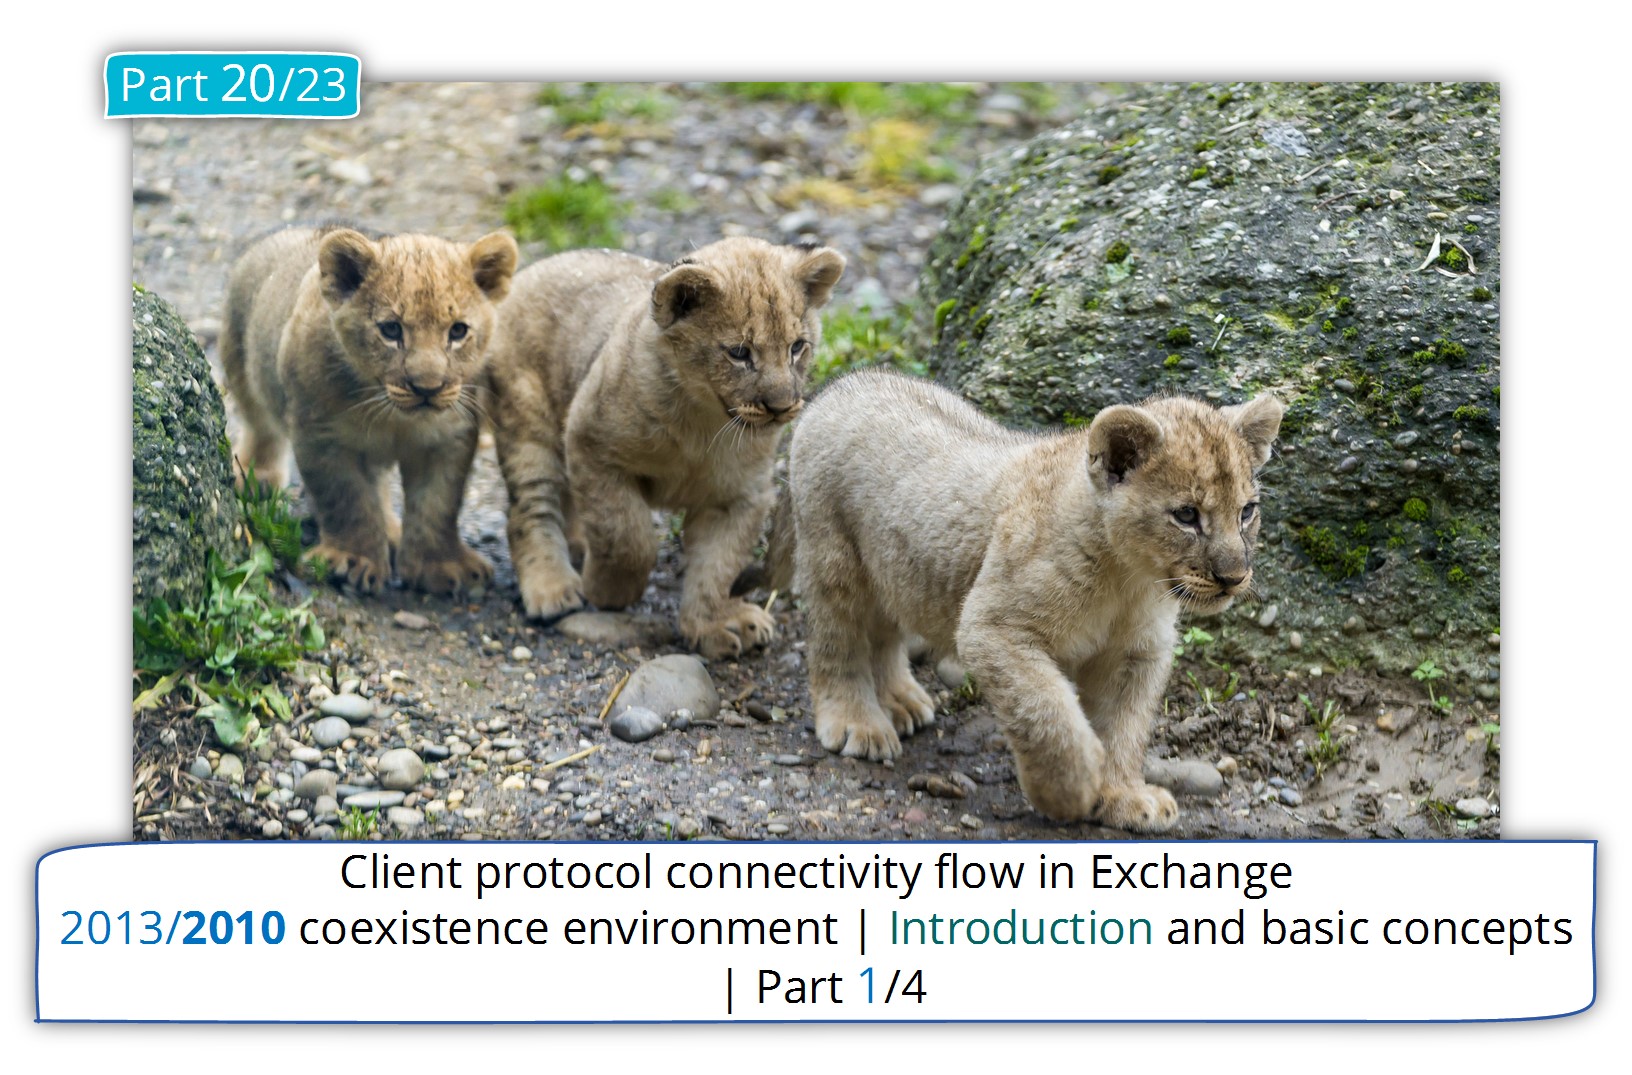 Client protocol connectivity flow in Exchange 2013/2010 coexistence environment | Introduction and basic concepts| 1/4 